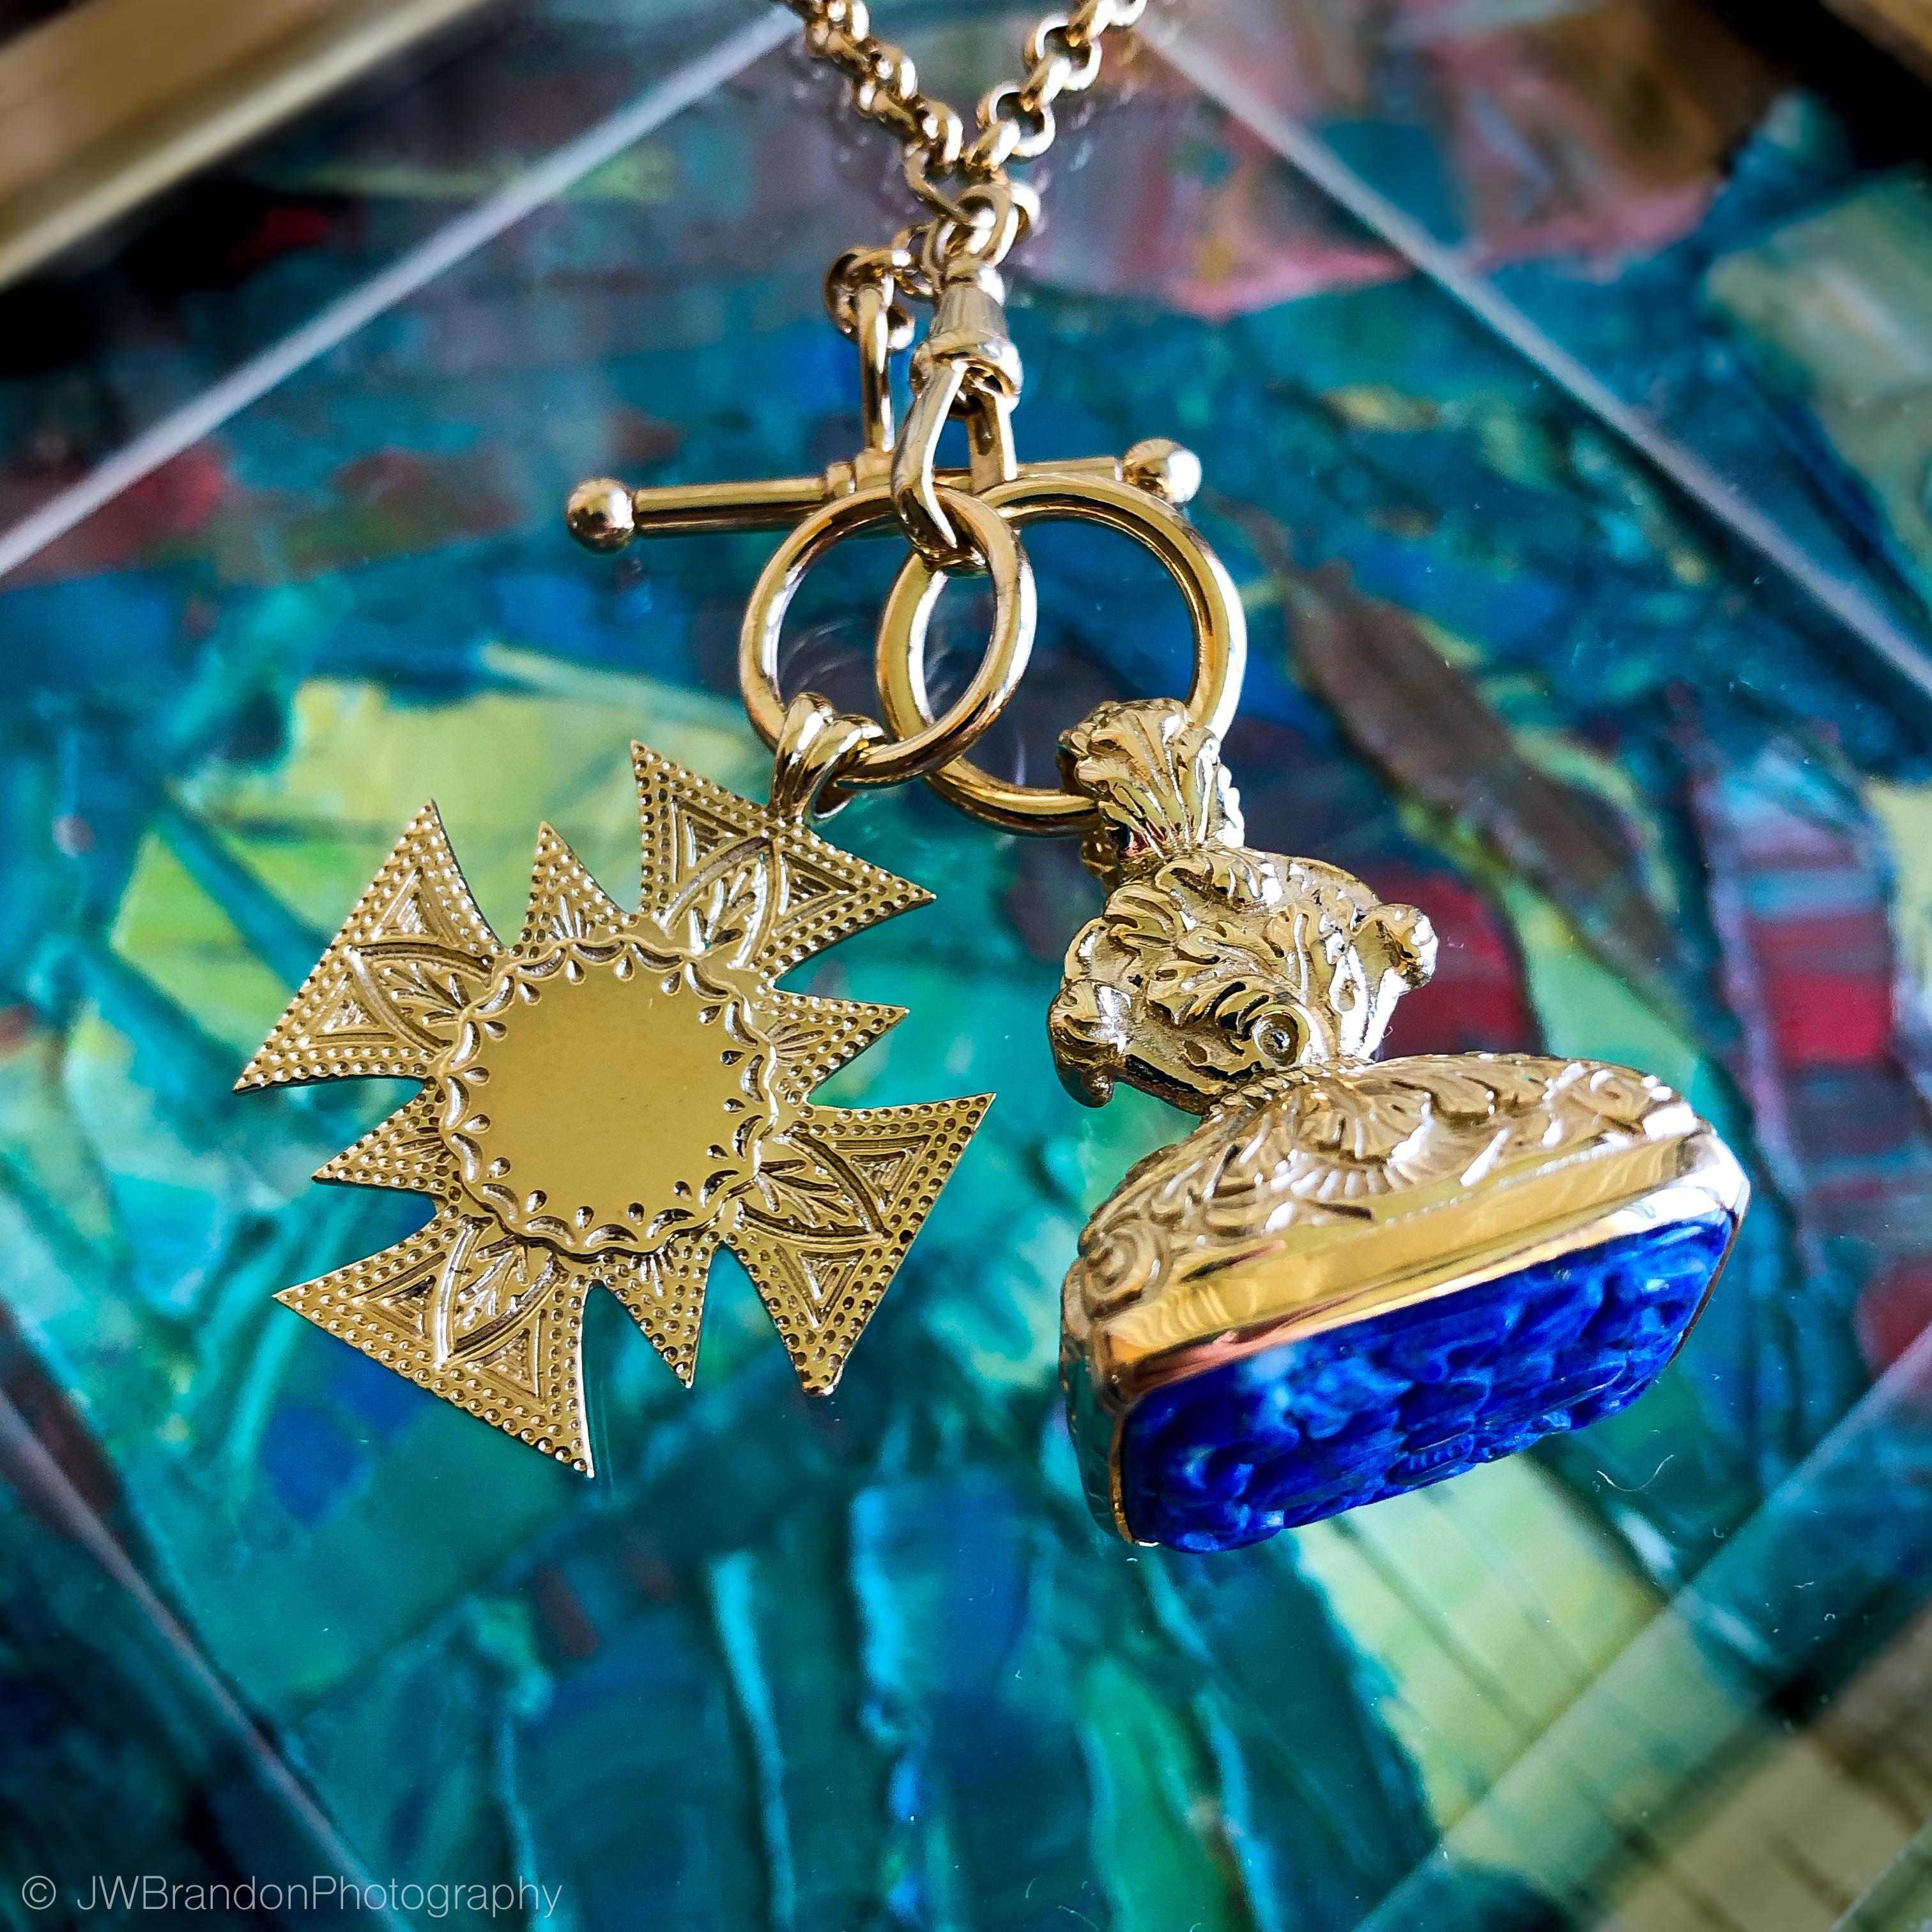 Dudley VanDyke's Coptic Cross Fob is featured in 14K Yellow Gold with a multisided engraveable starburst.  Also known as an Ethiopian Cross, the Coptic Cross Fob is available as a 14K Yellow Gold and Sterling Silver mixed metal fob and by custom